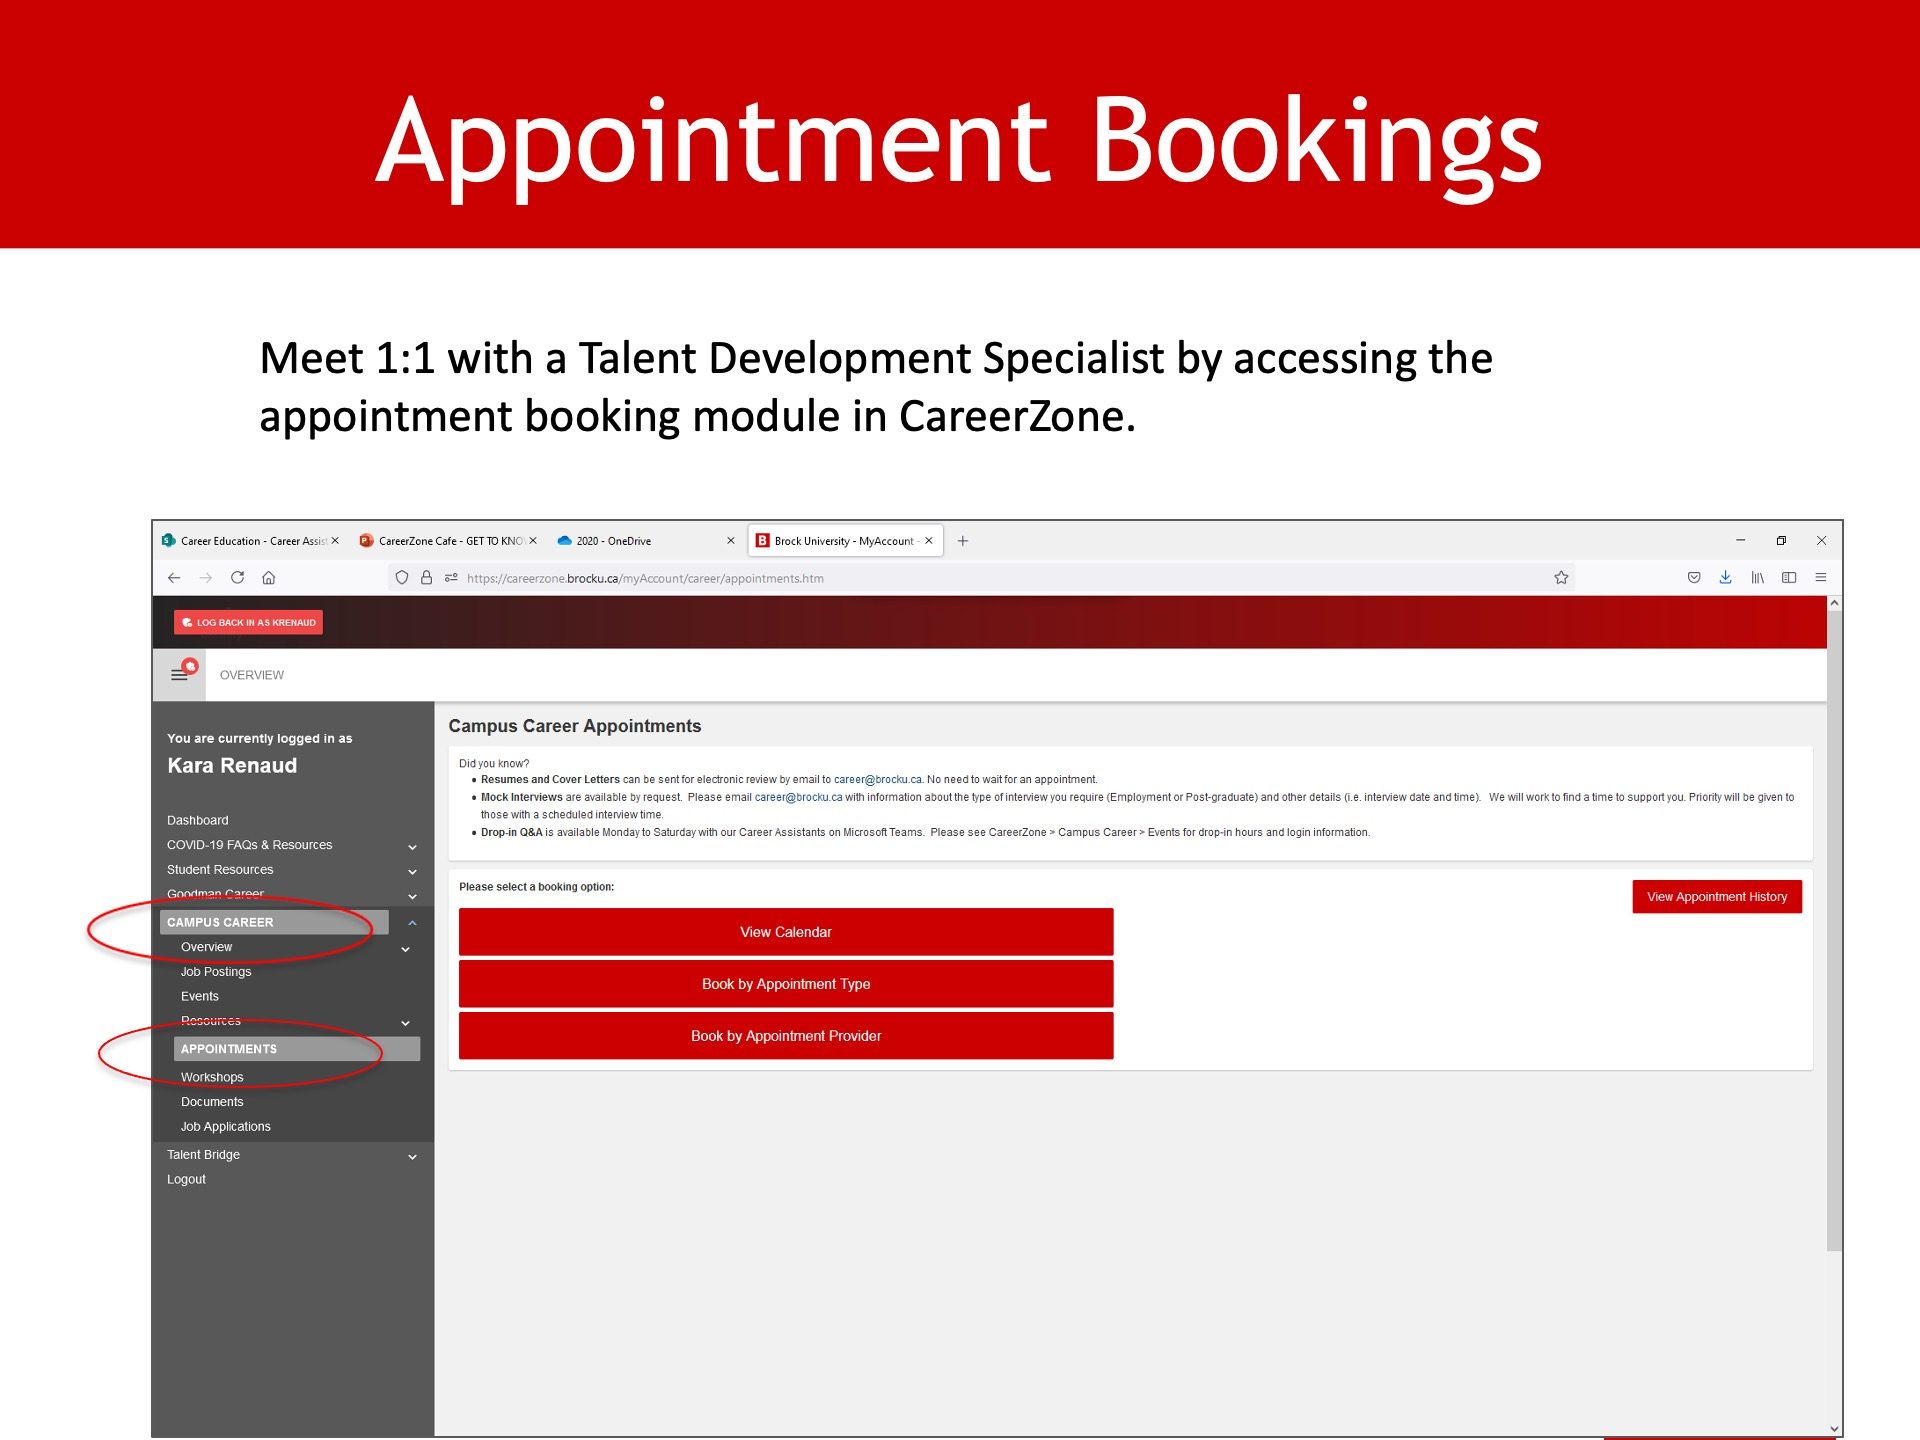 Appointment bookings